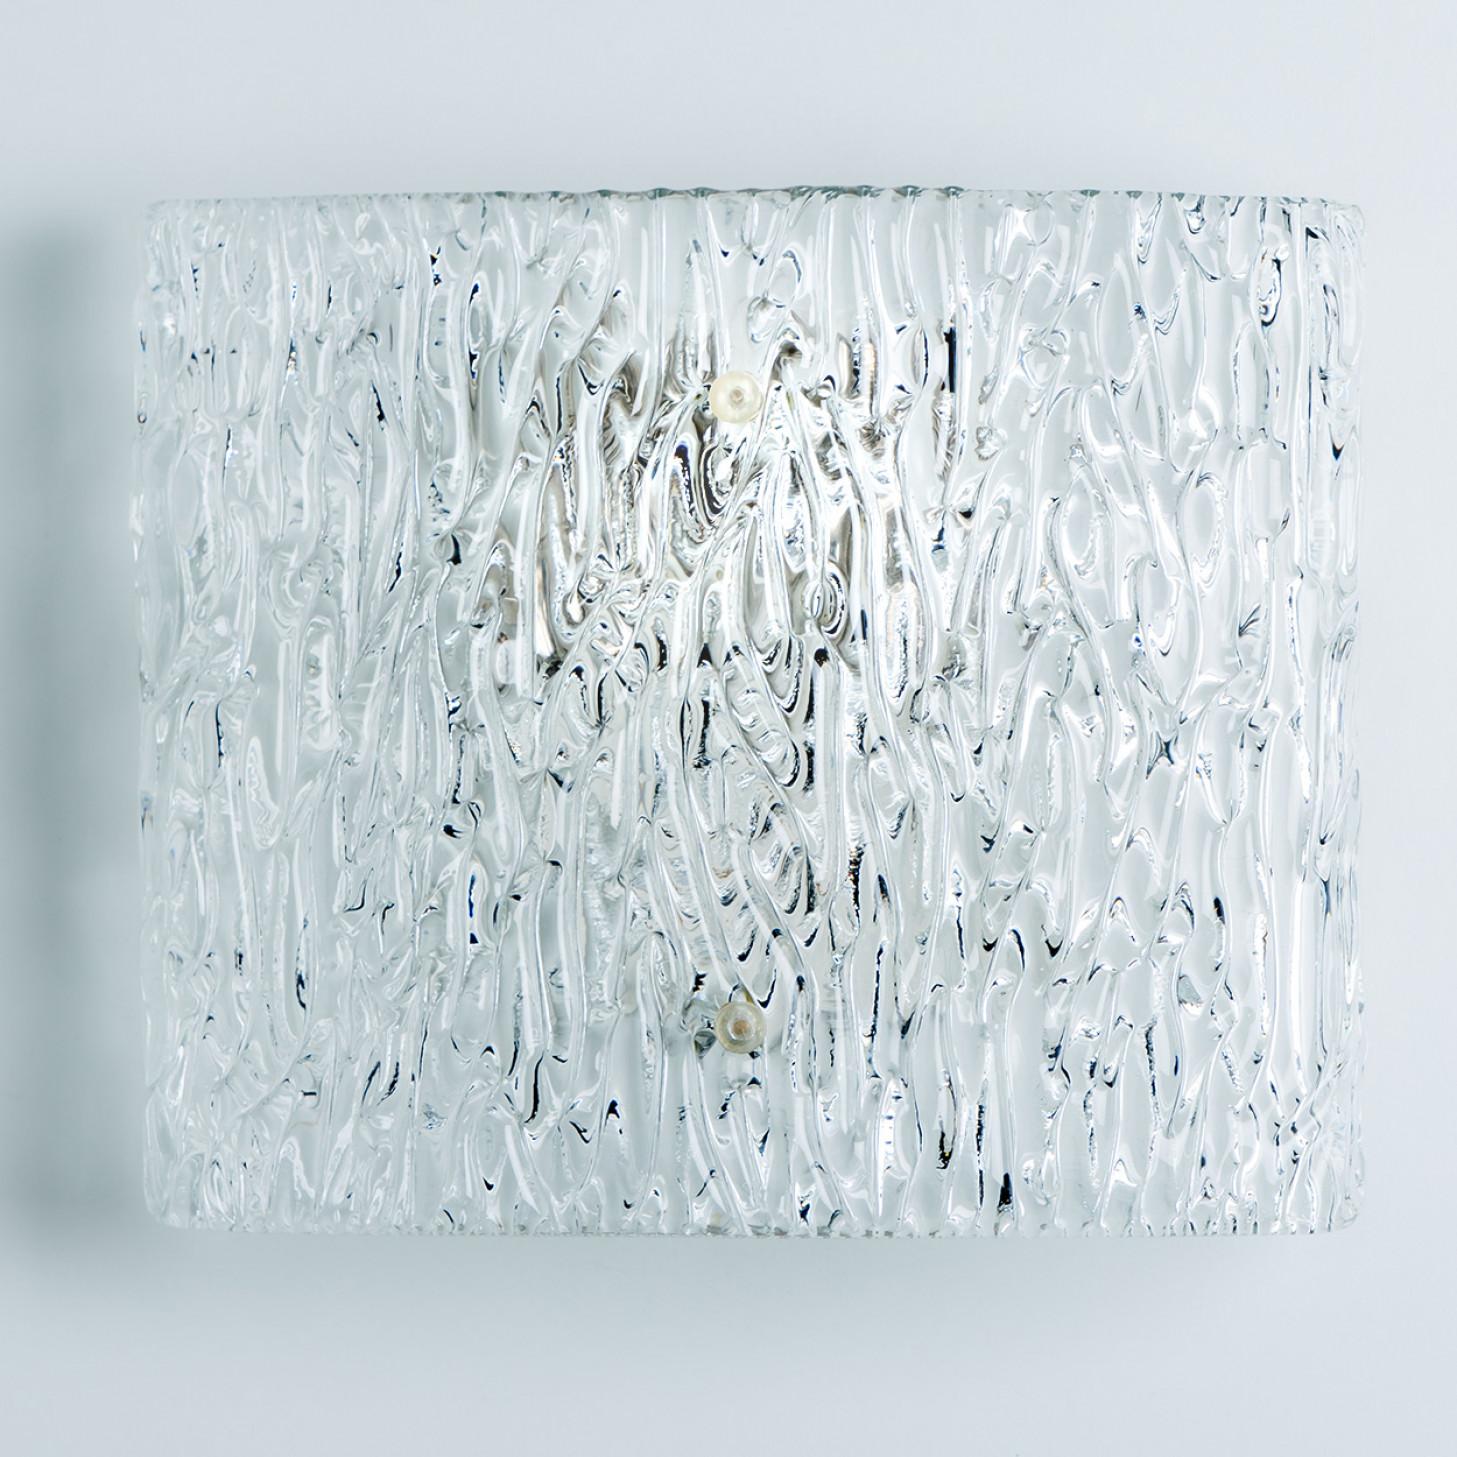 Beautiful high quality light fixture made by Kalmar, Austria. Manufactured in mid century, circa 1970 (at the end of 1960s and beginning of 1970s).

This wall light features lights made of handmade wave ice glass and silver back plate. The sides